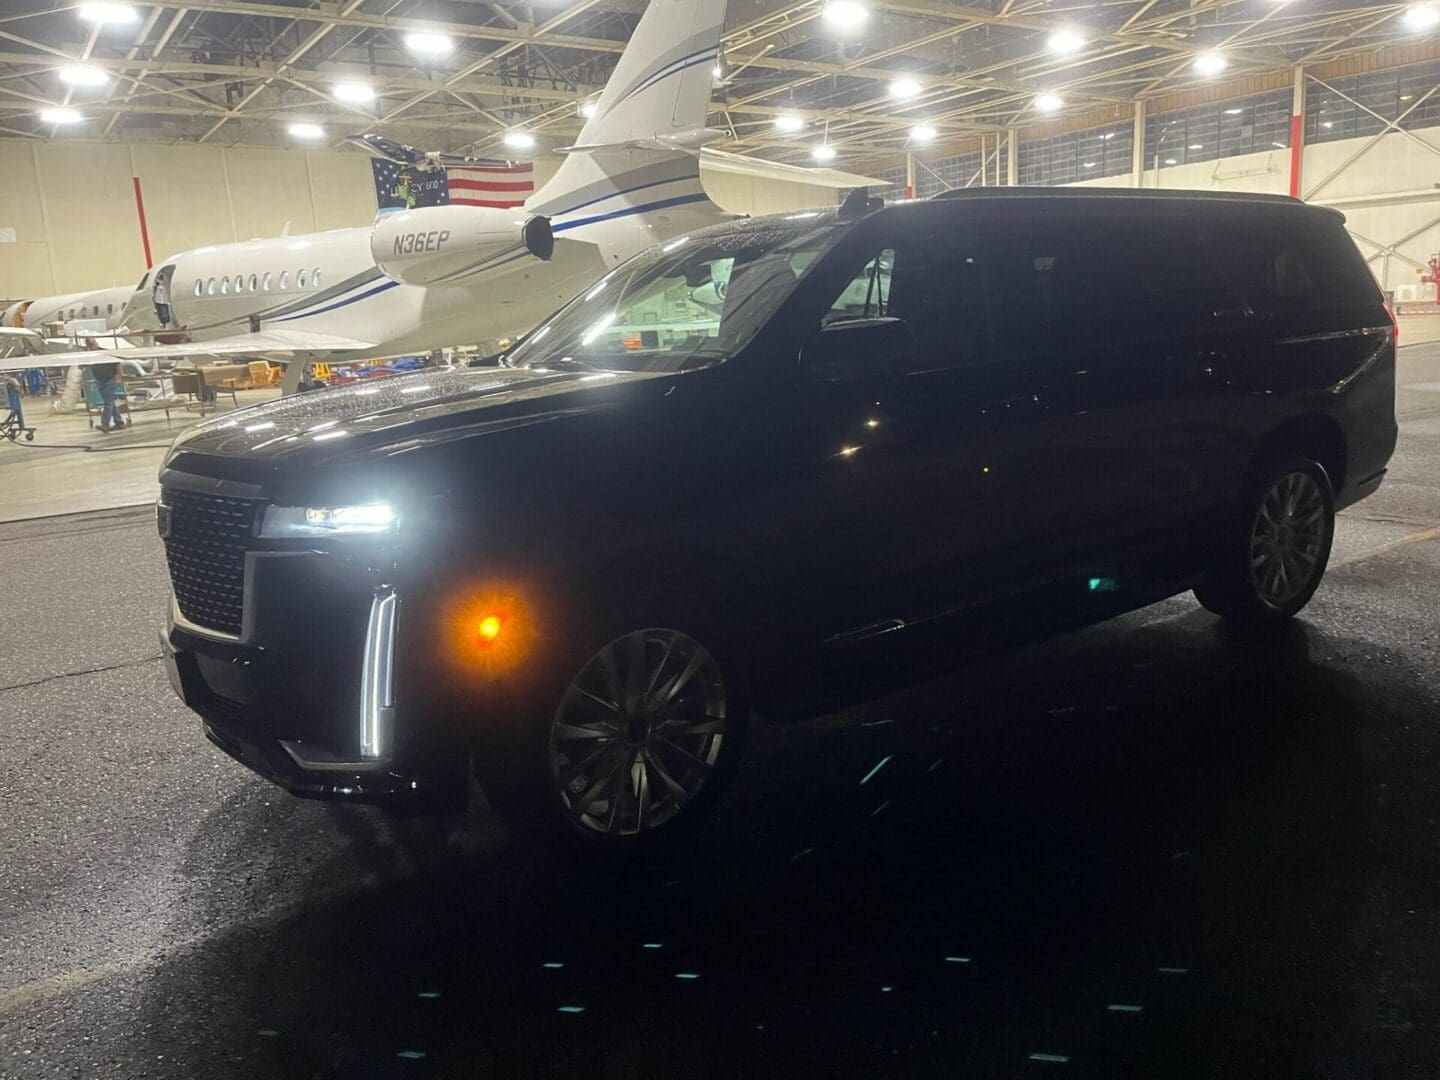 A black suv parked in an airport hangar.